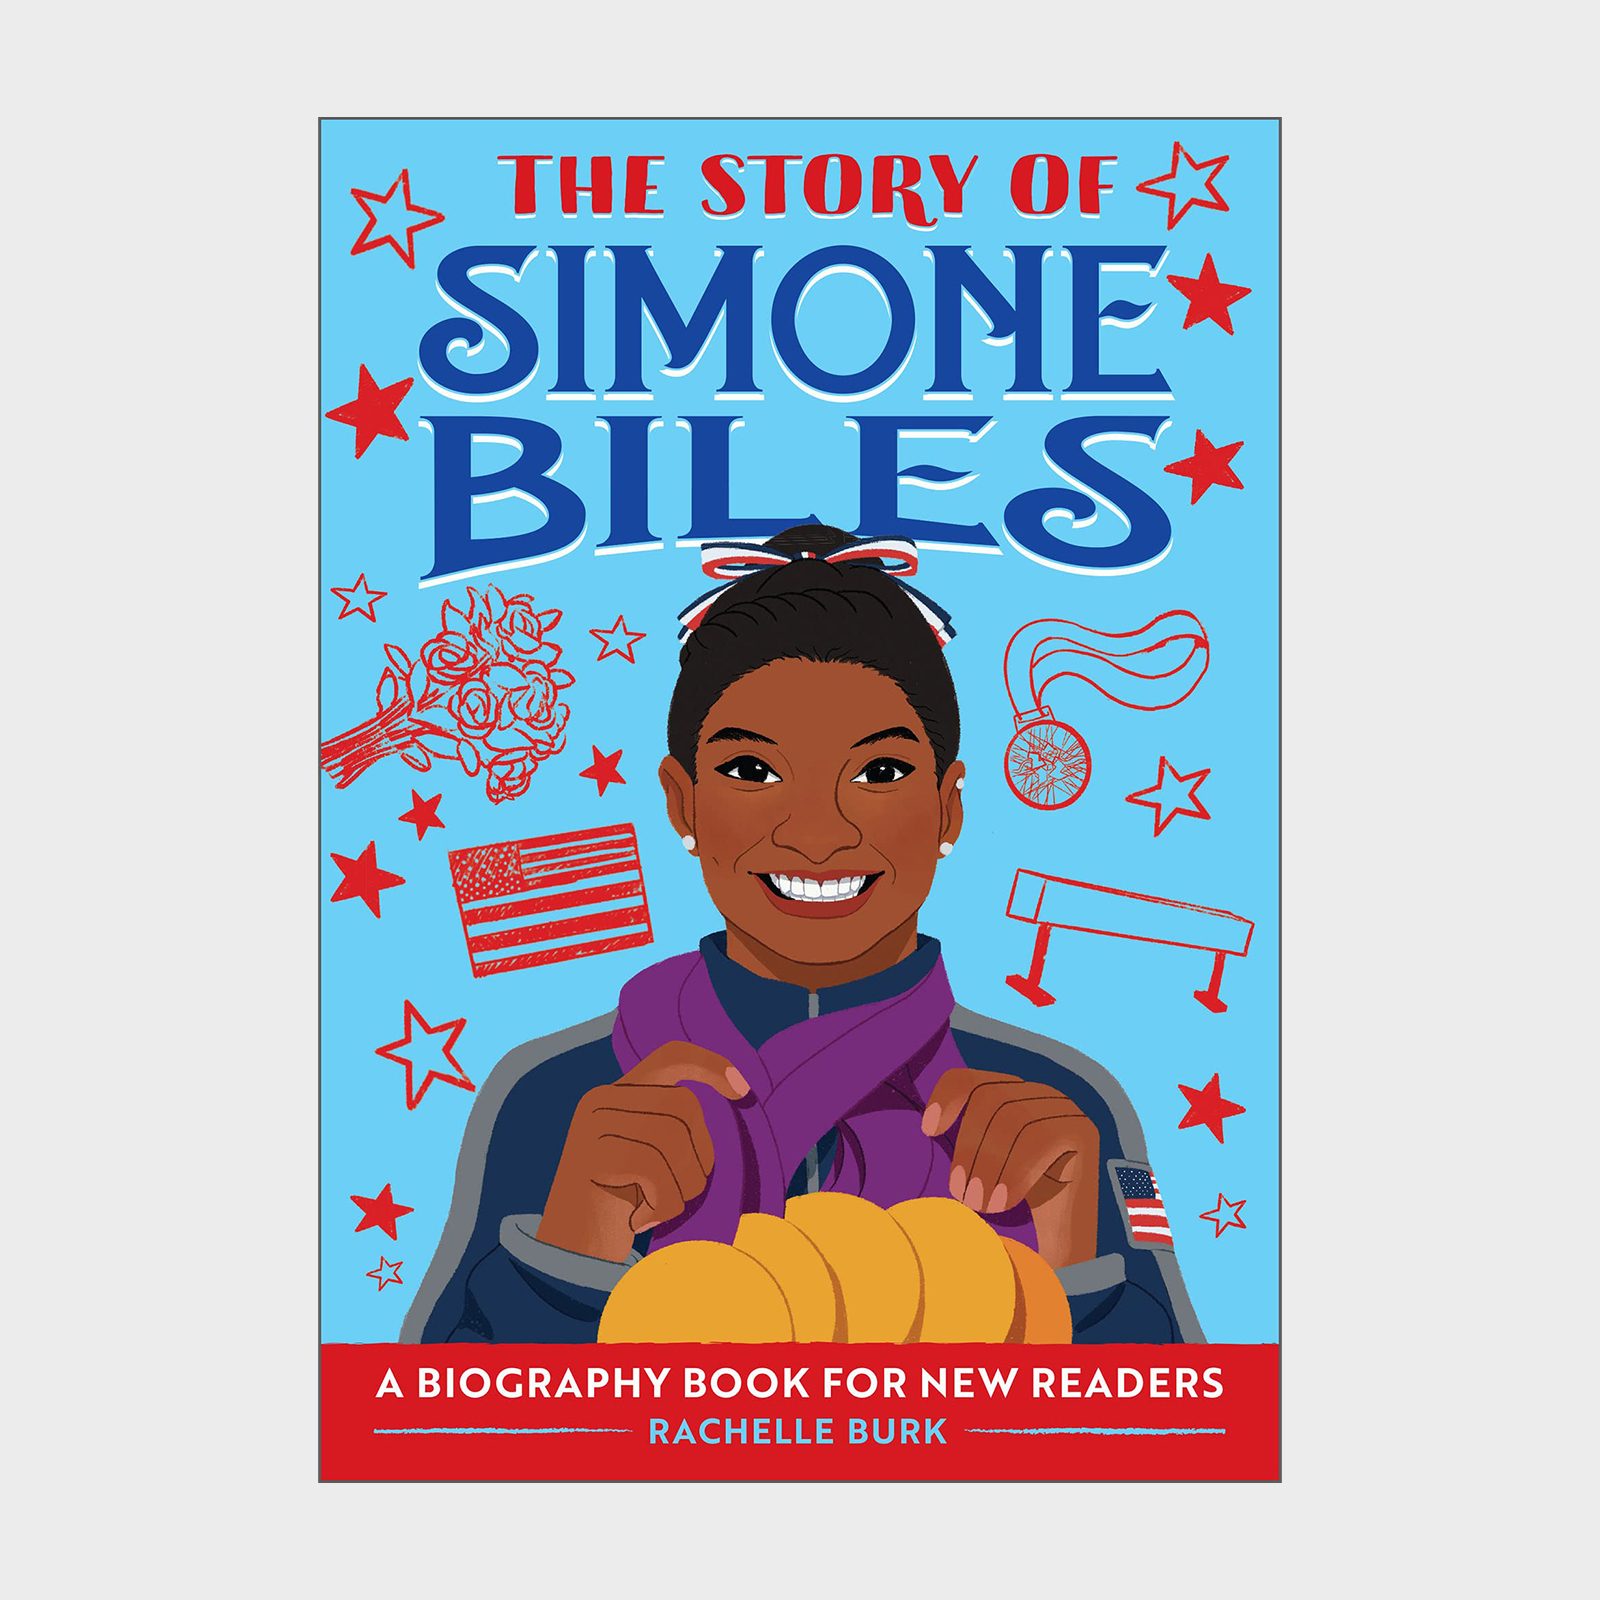 The Story Of Simone Biles A Biography Book For New Readers By Rachelle Burk Children's Book